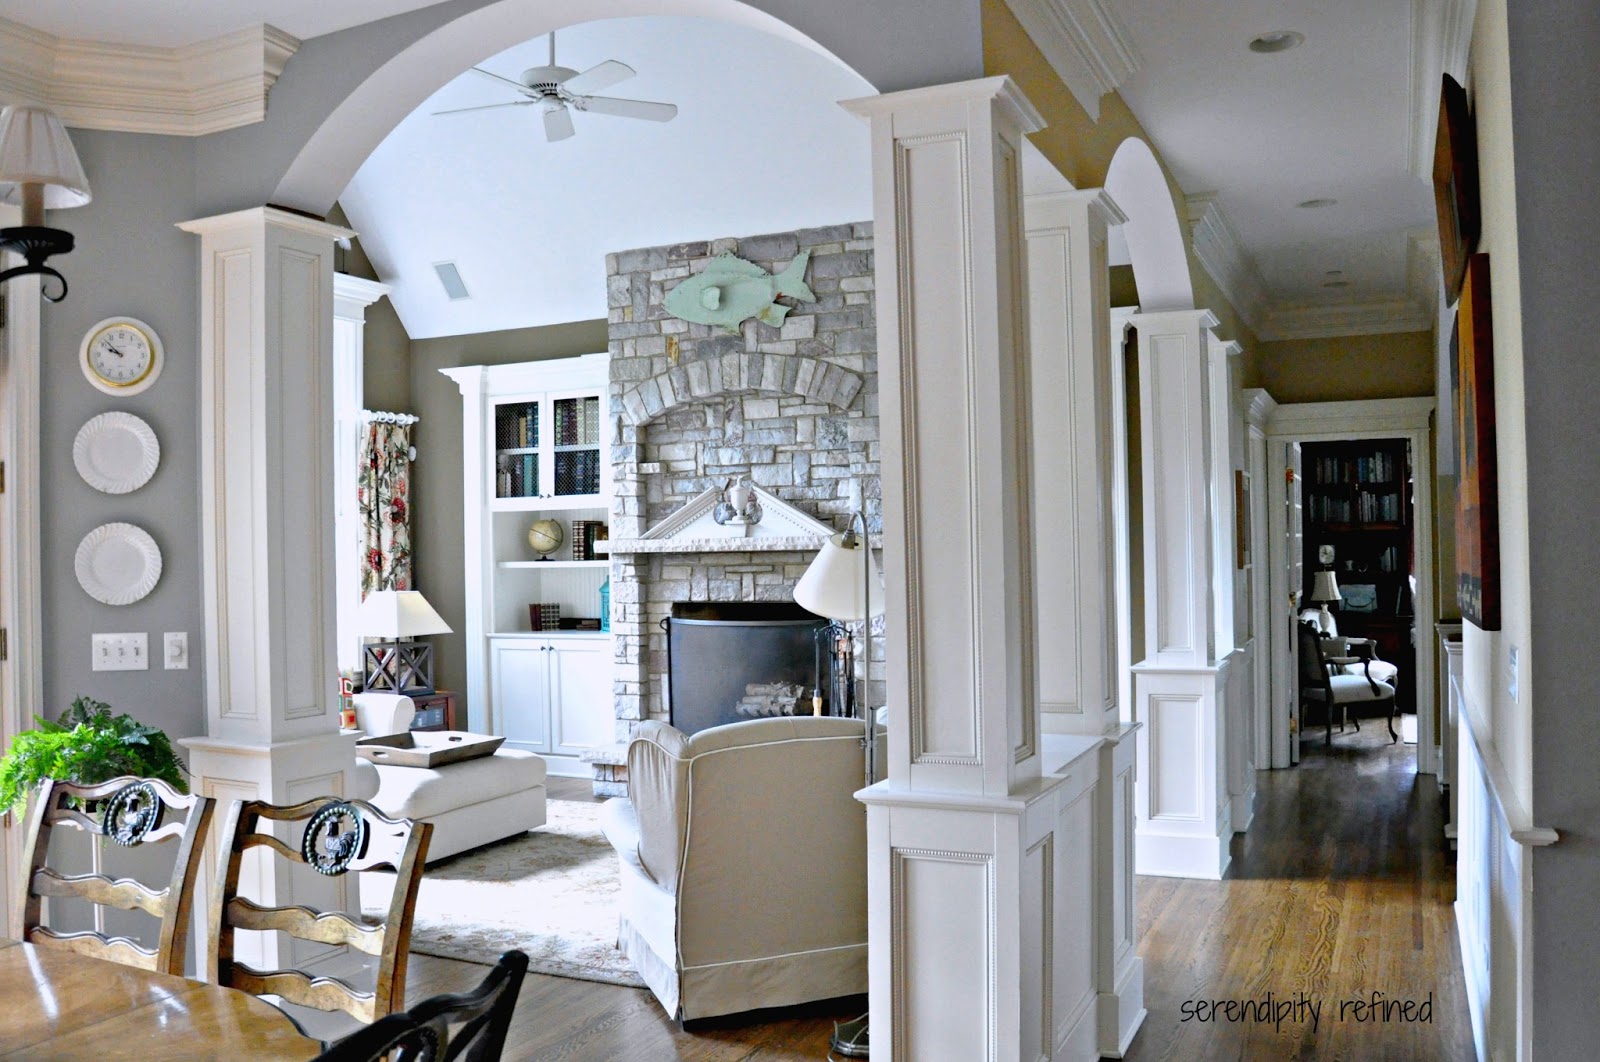 Serendipity Refined: Family Room Reveal: Coastal or Eclectic?